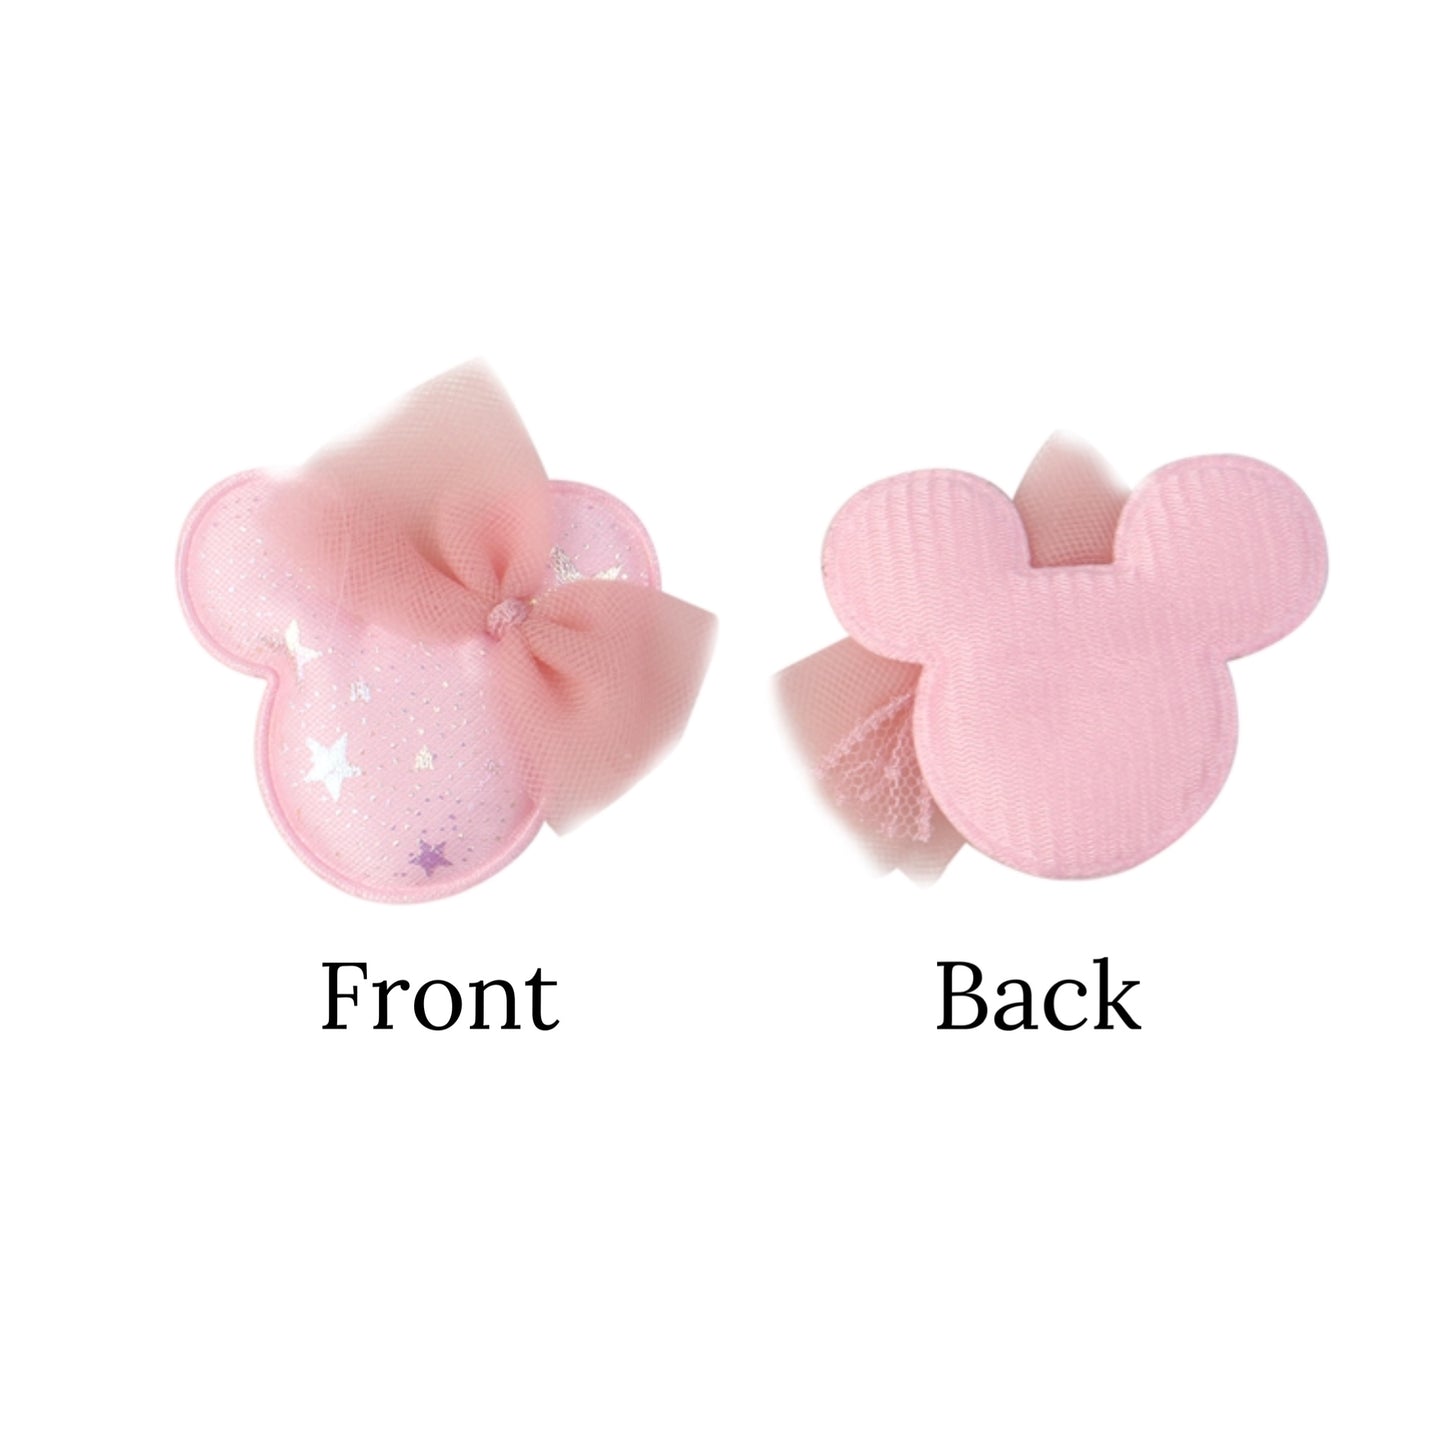 front and back of pink padded mouse embellishment